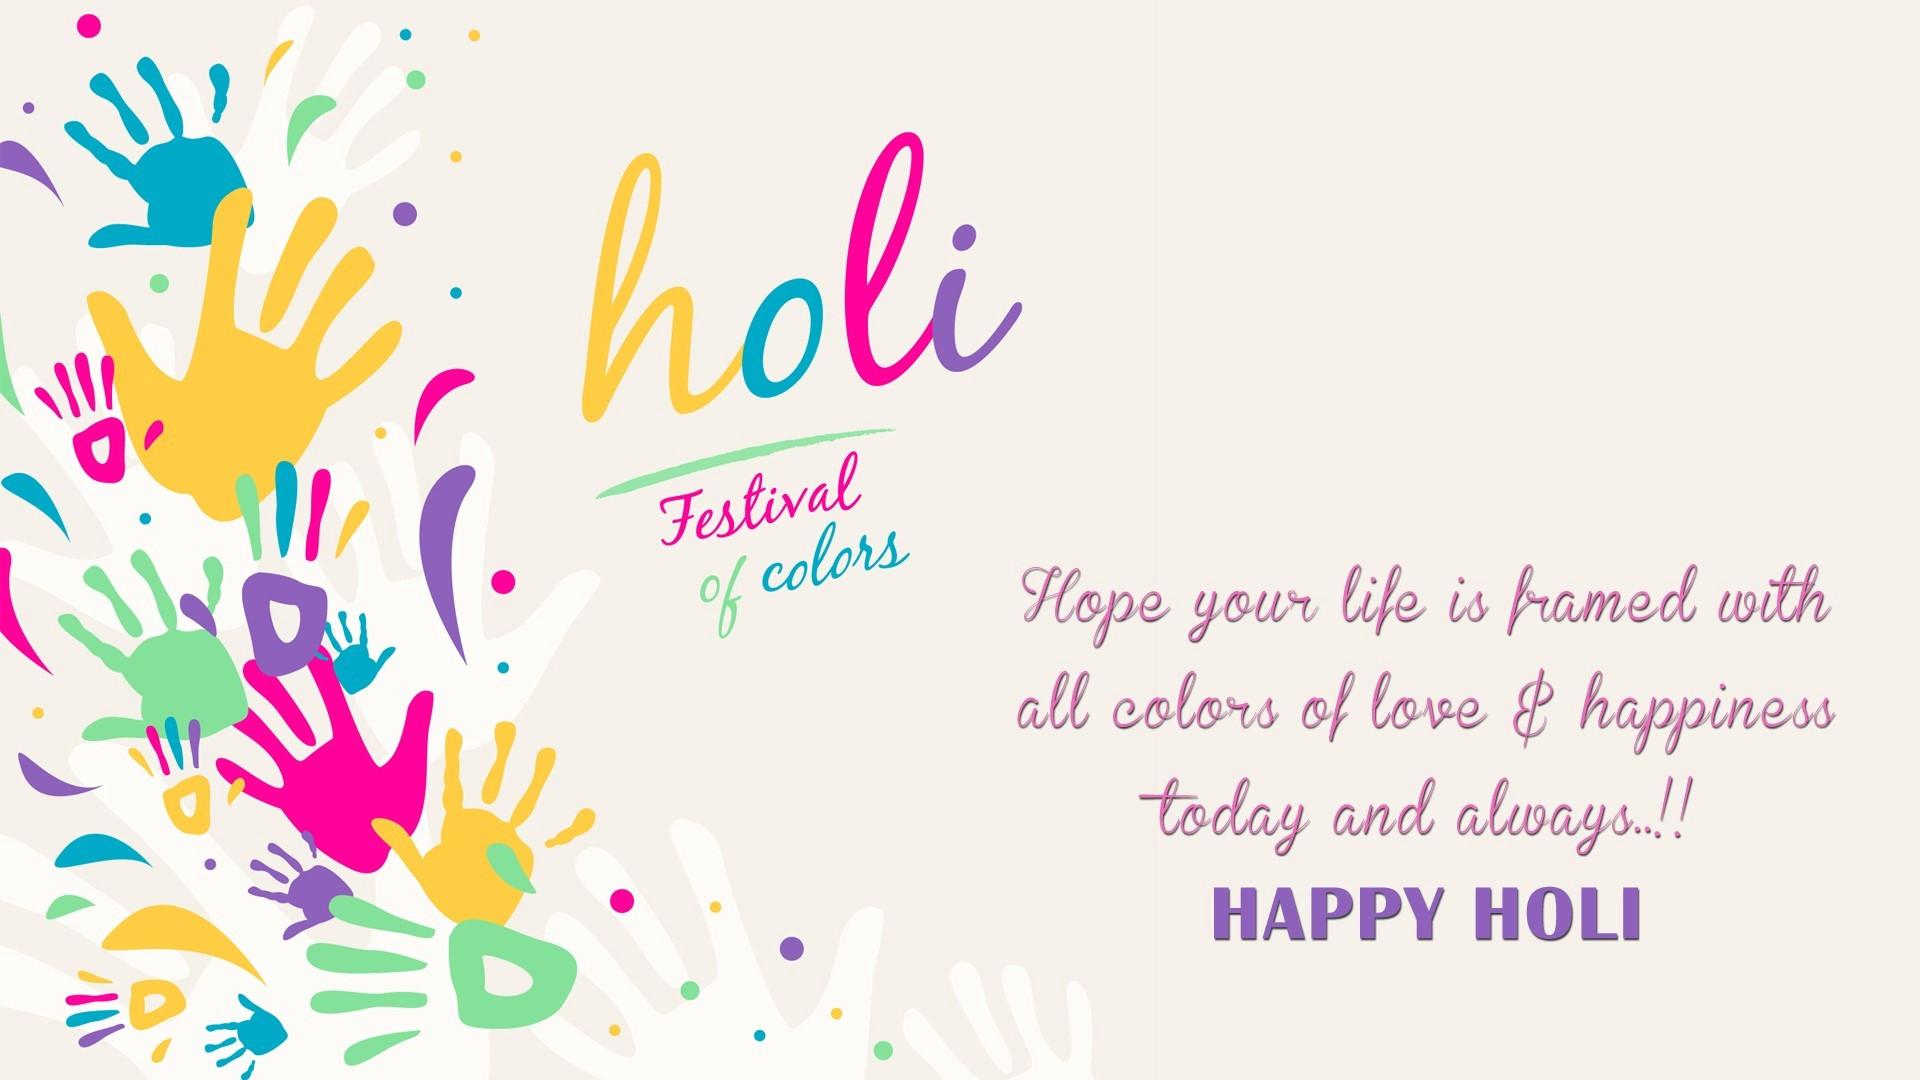 Holi Festival of Colors Greetings Message HD Wallpaper